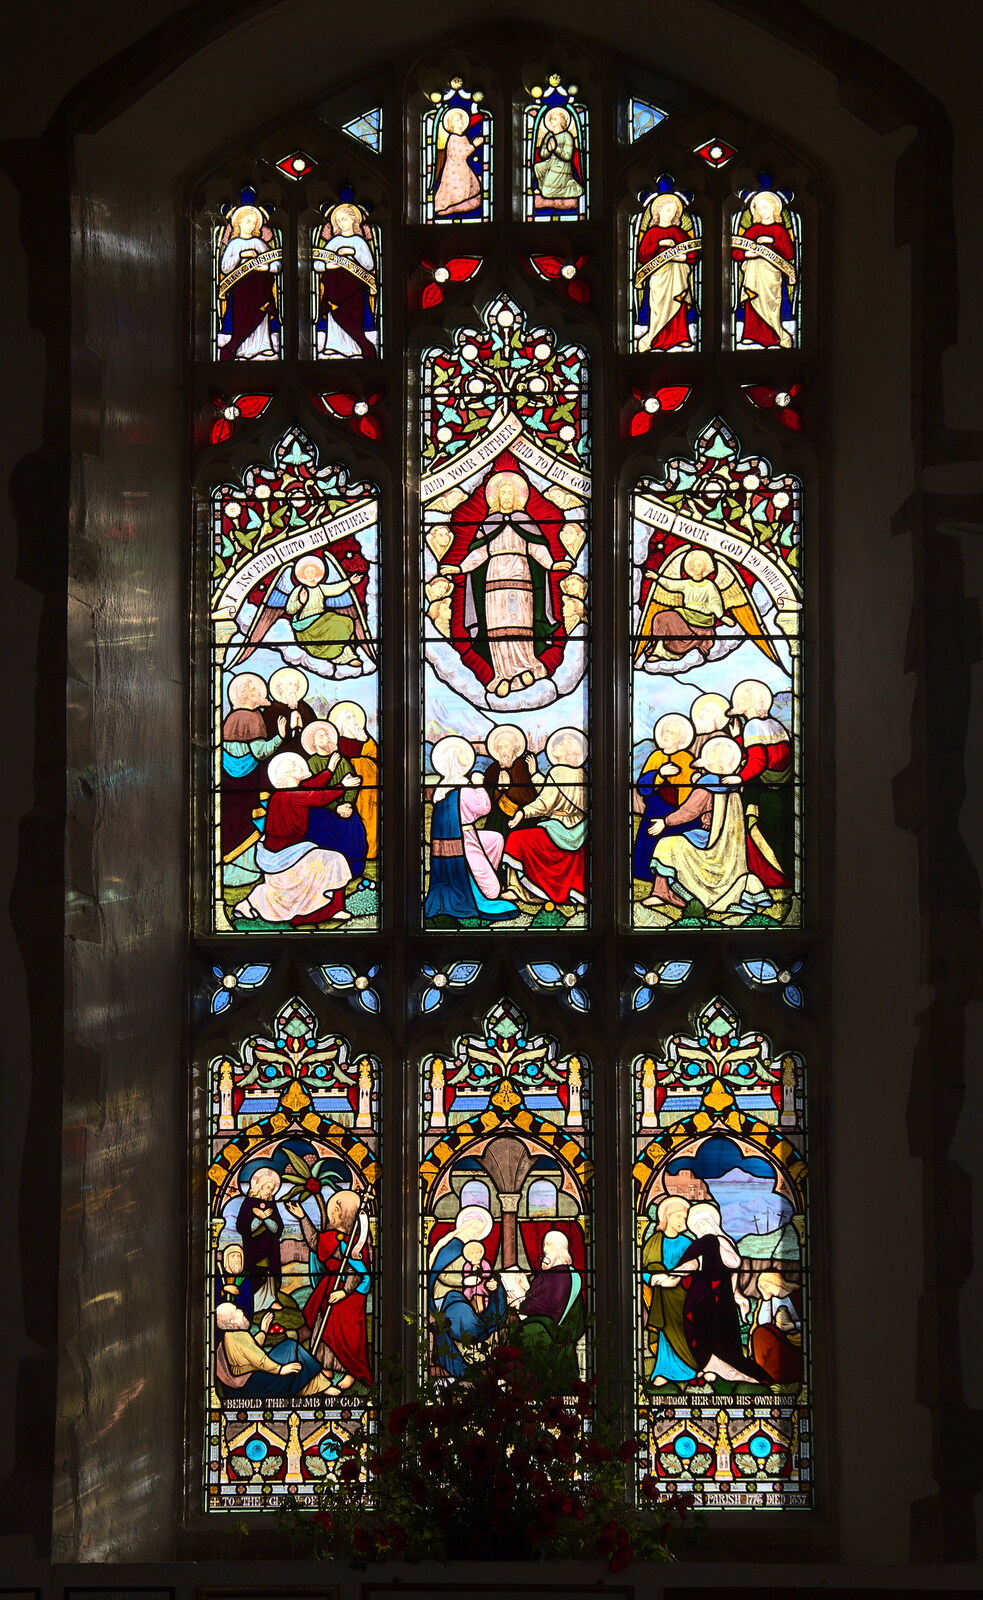 A Postcard from Flatford and Dedham, Suffolk and Essex, 9th November 2022: A colourful stained glass window